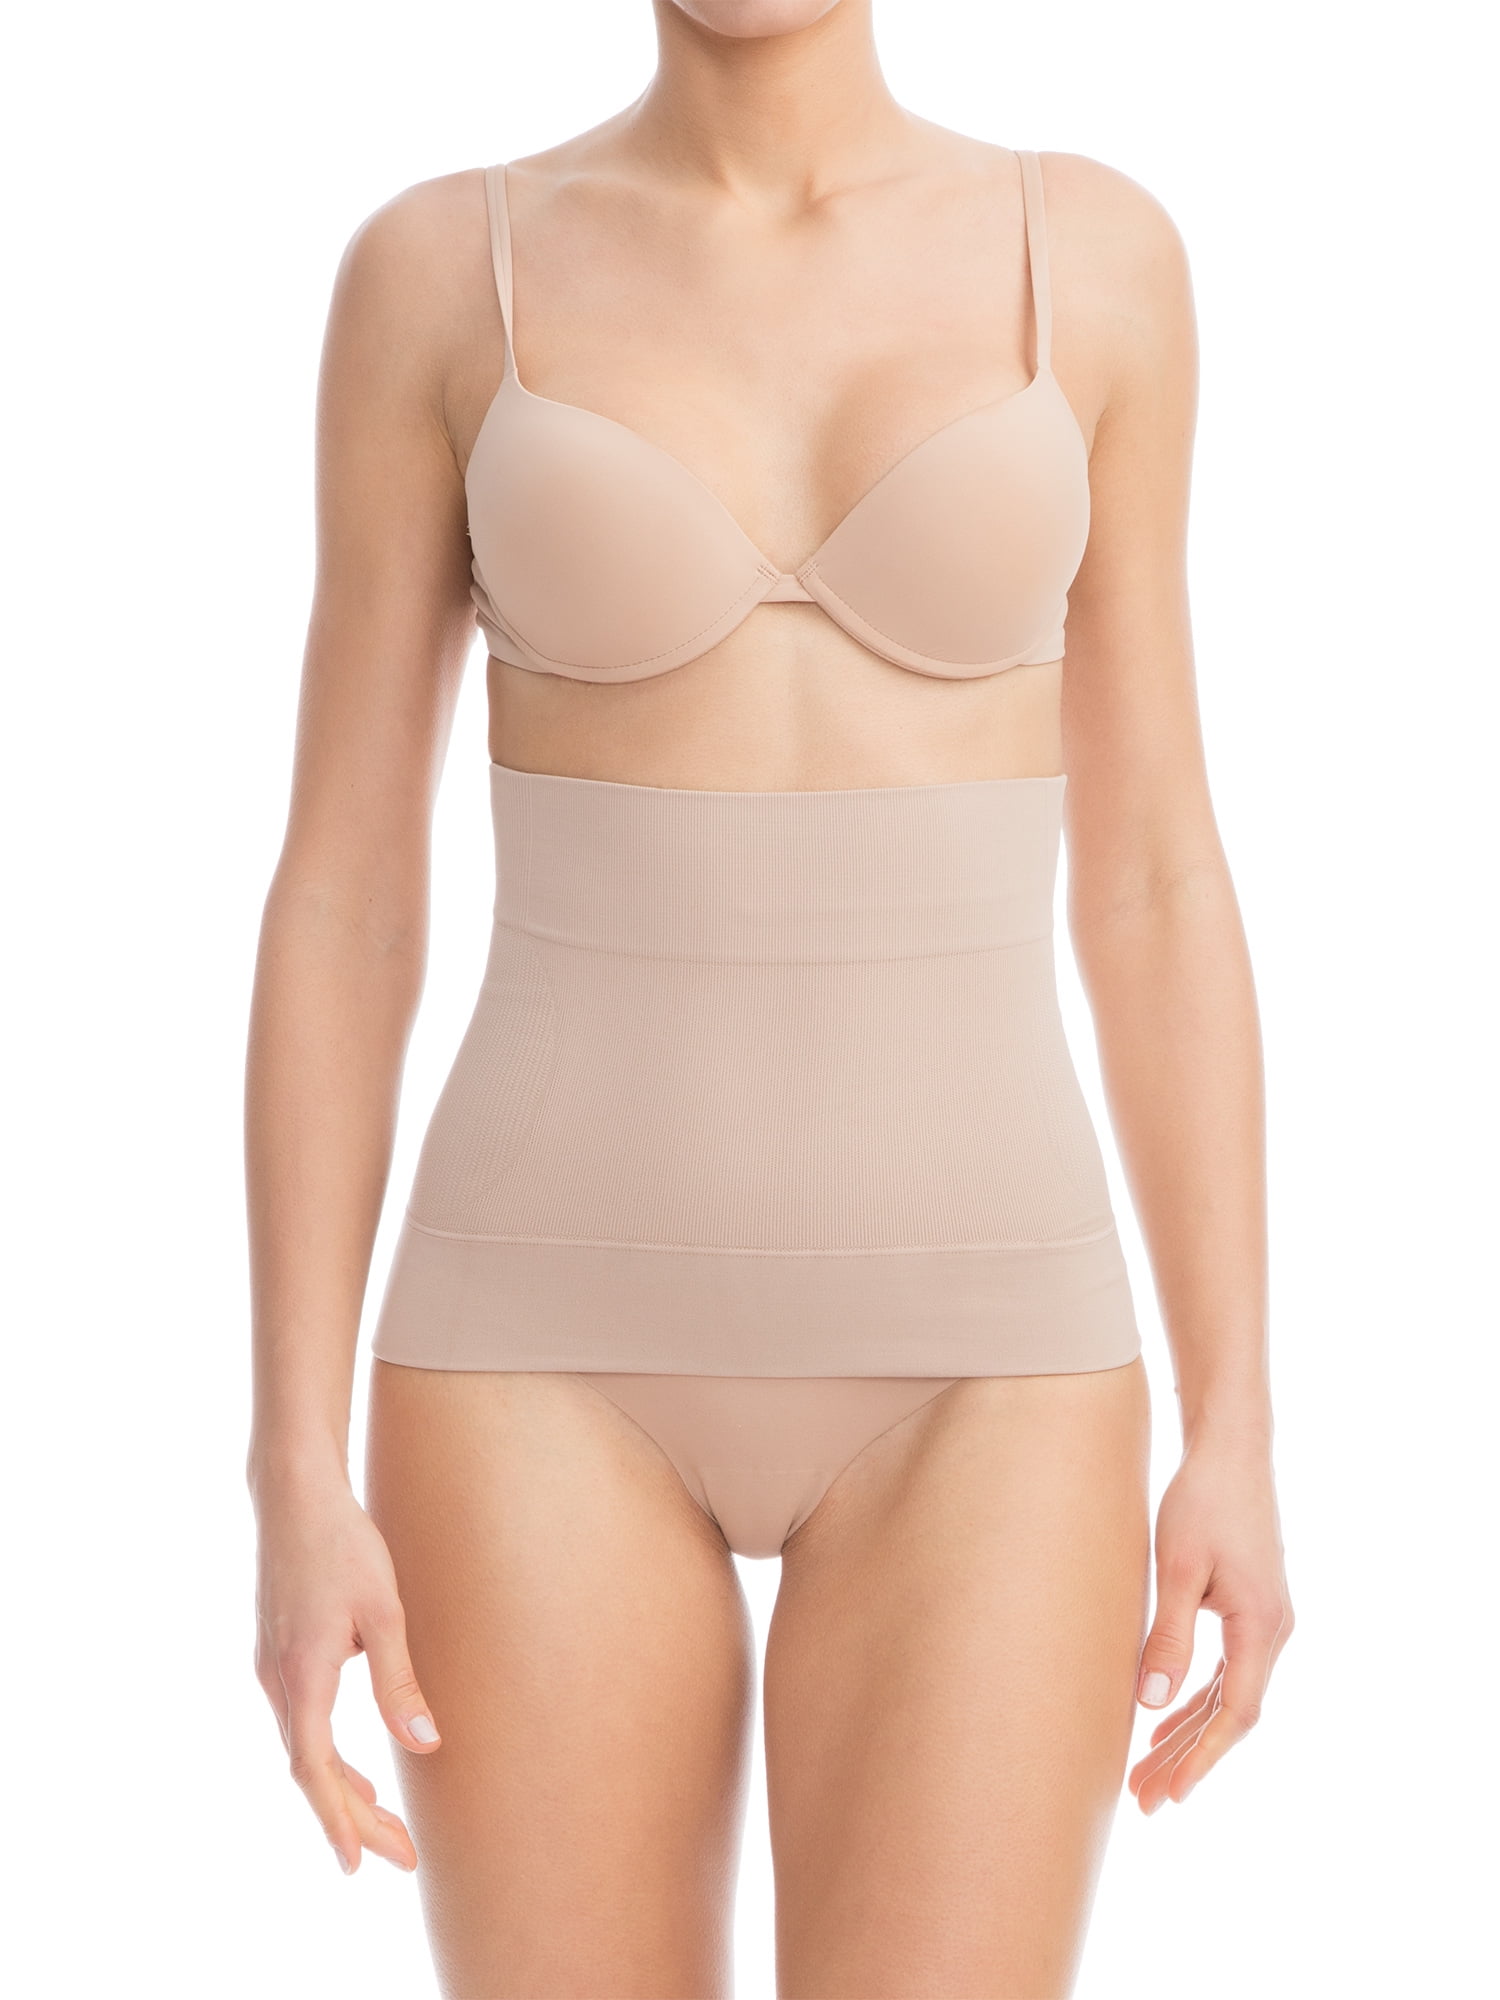 1st Stage Marena Women's Girdle with Suspenders and No Leg Coverage